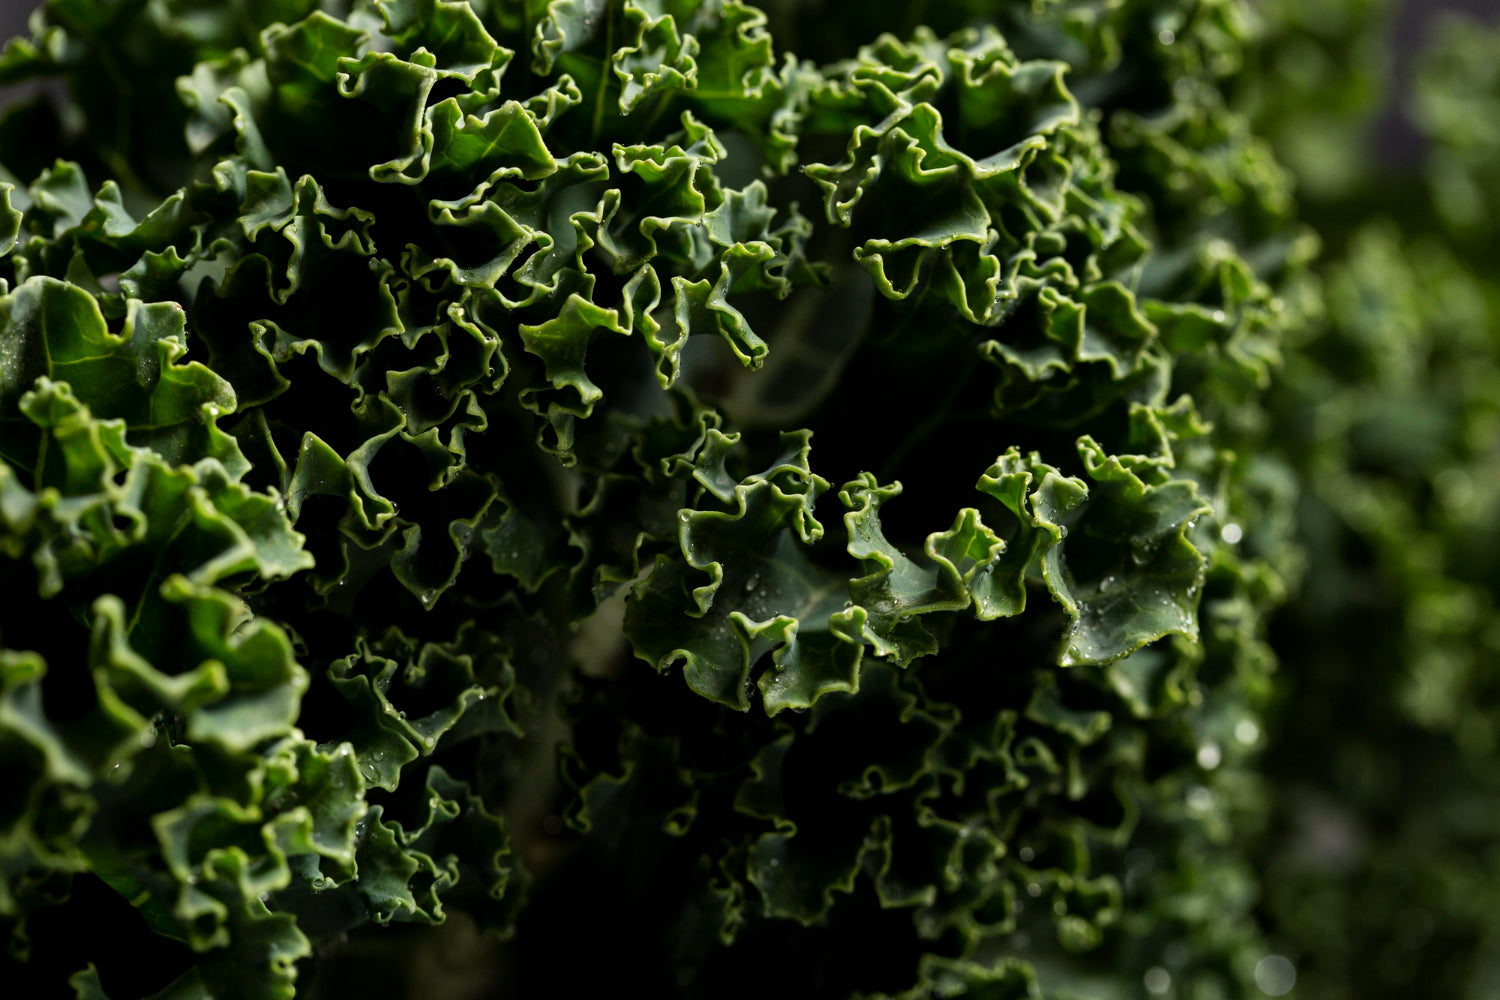 How to Grow Kale From Seed - A Comprehensive Guide